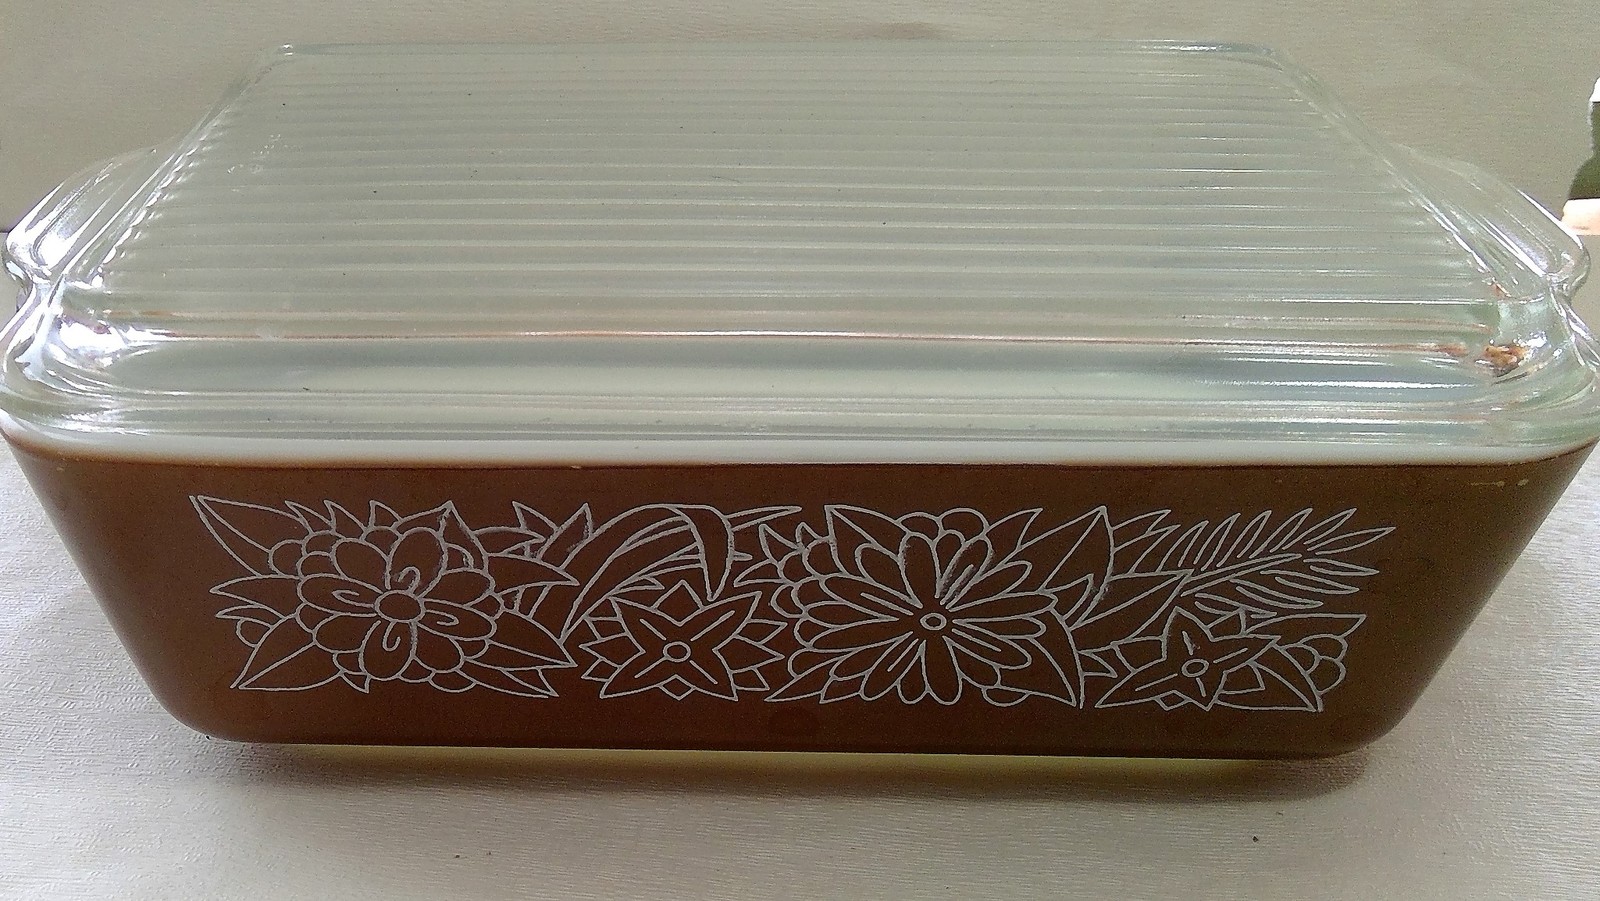 Primary image for Pyrex Woodland 1.5 qt casserole with lid